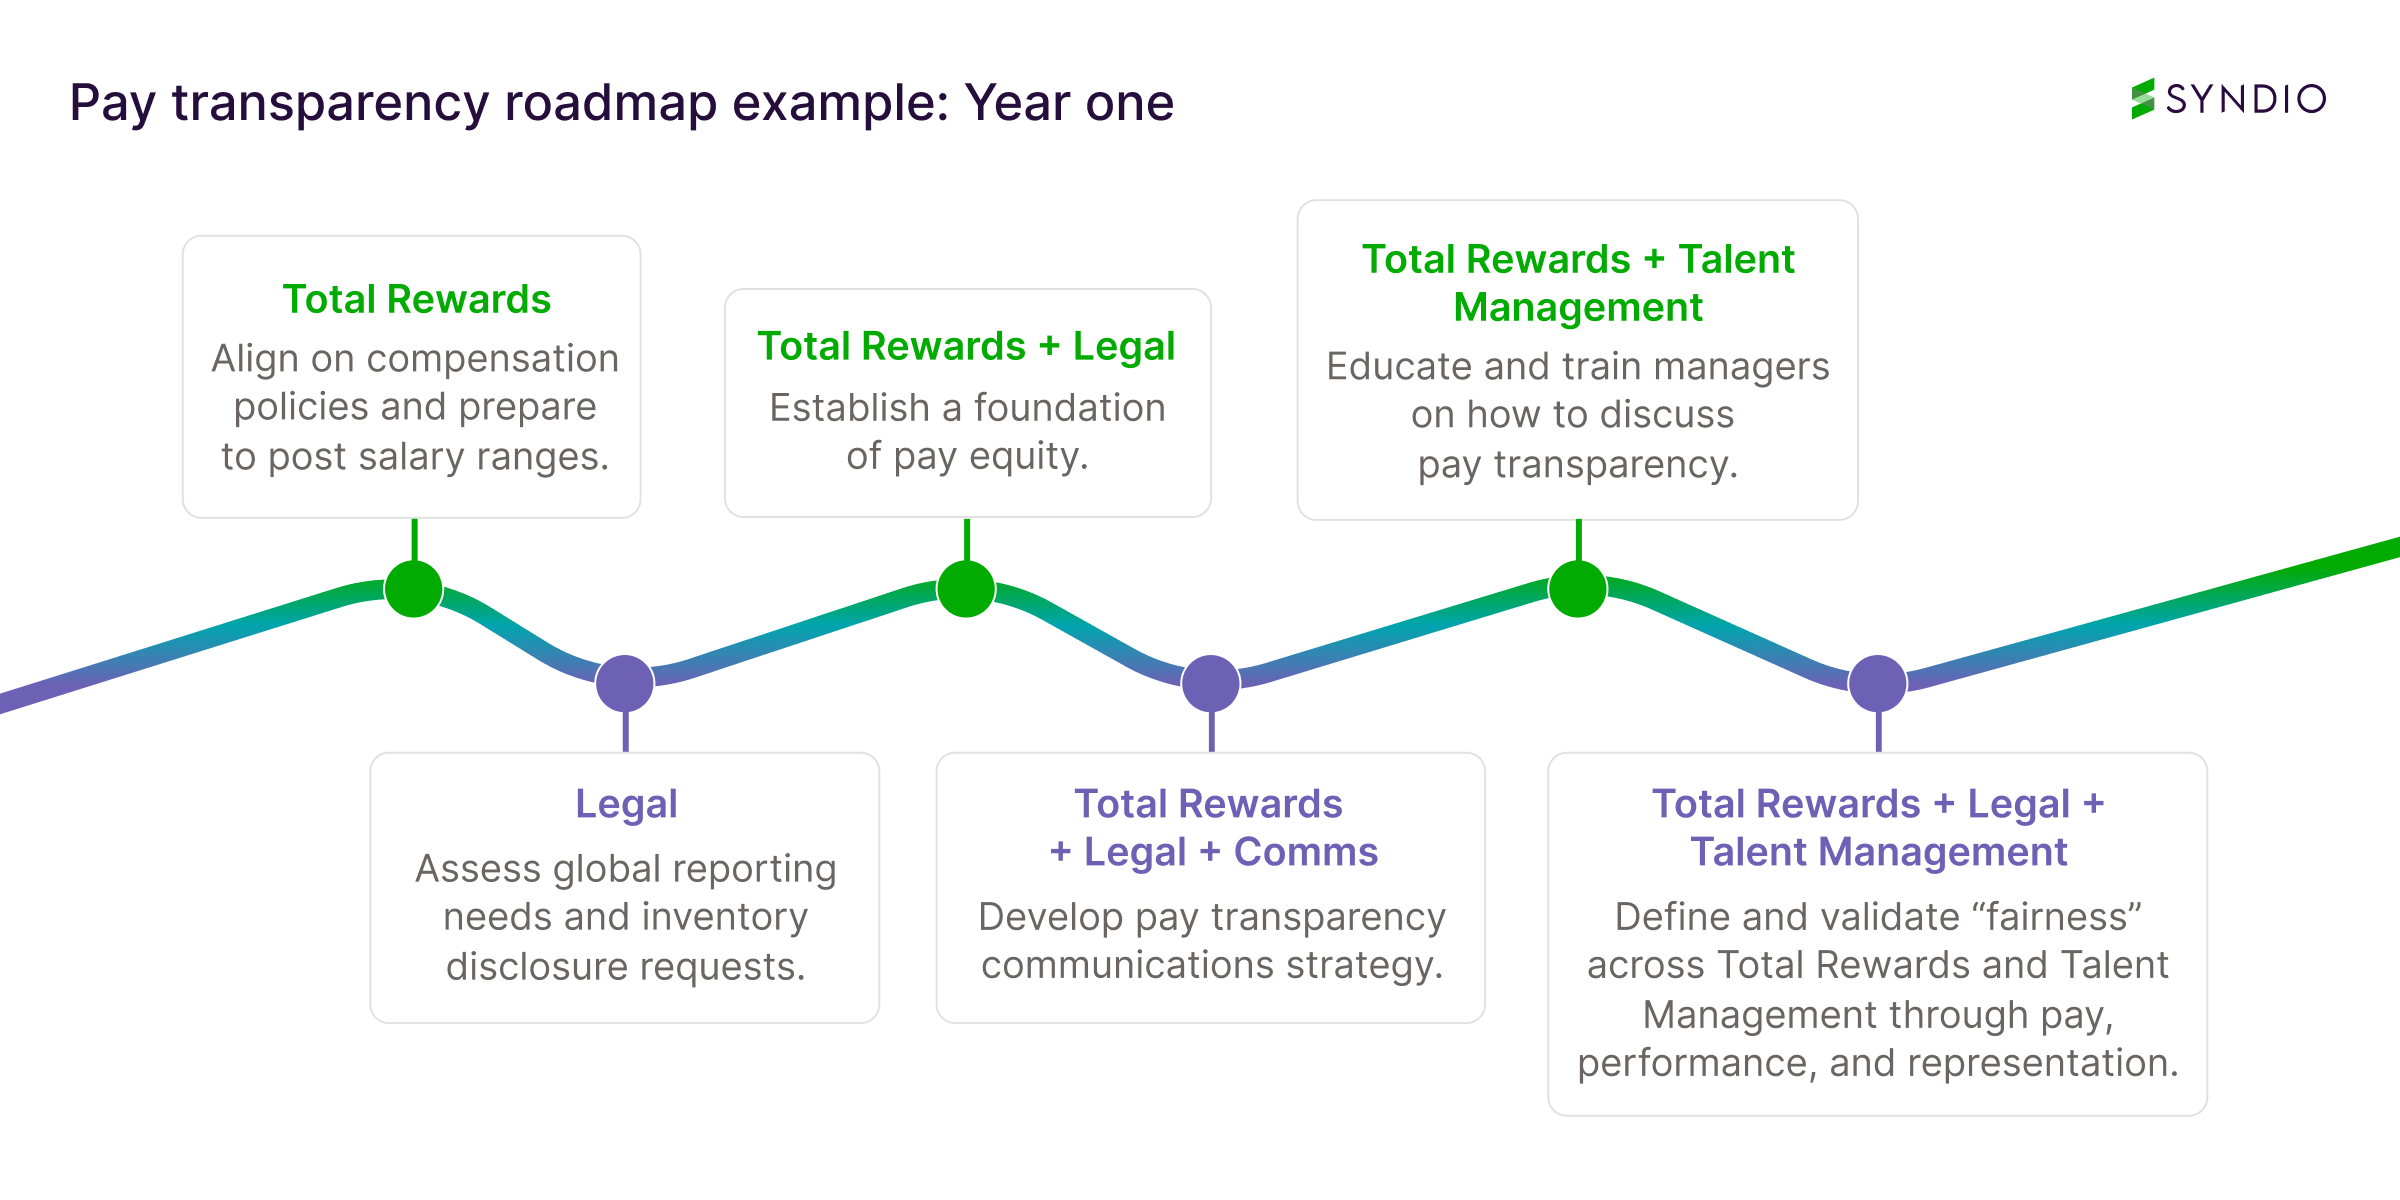 Pay transparency roadmap example: Year one